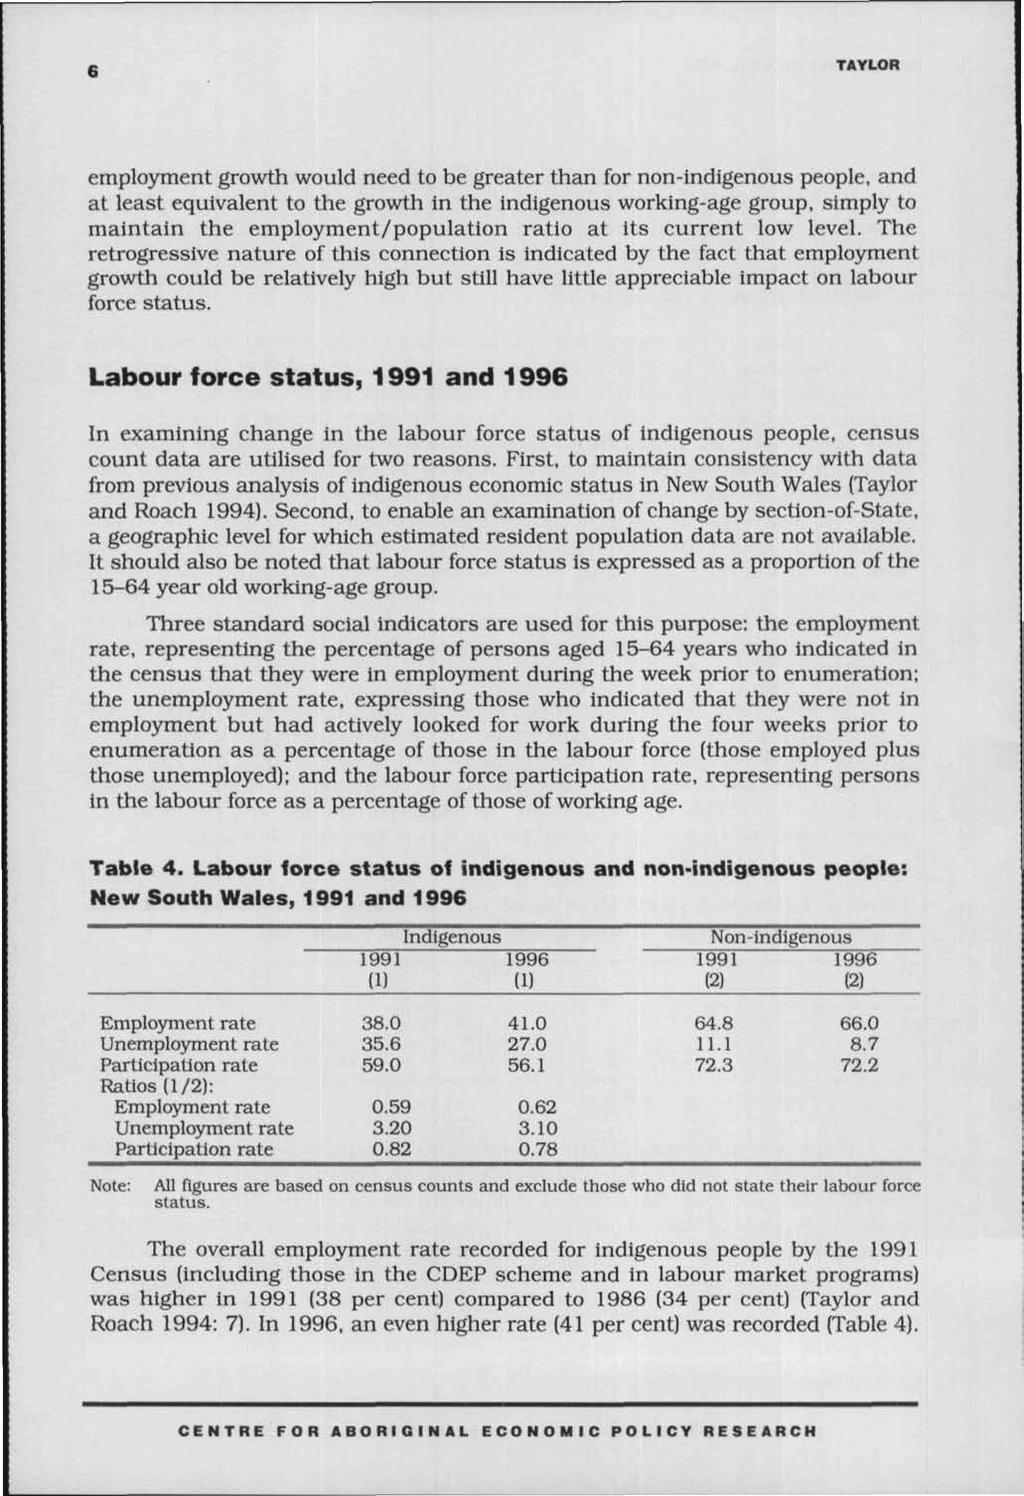 TAYLOR employment growth would need to be greater than for non-indigenous people, and at least equivalent to the growth in the indigenous working-age group, simply to maintain the